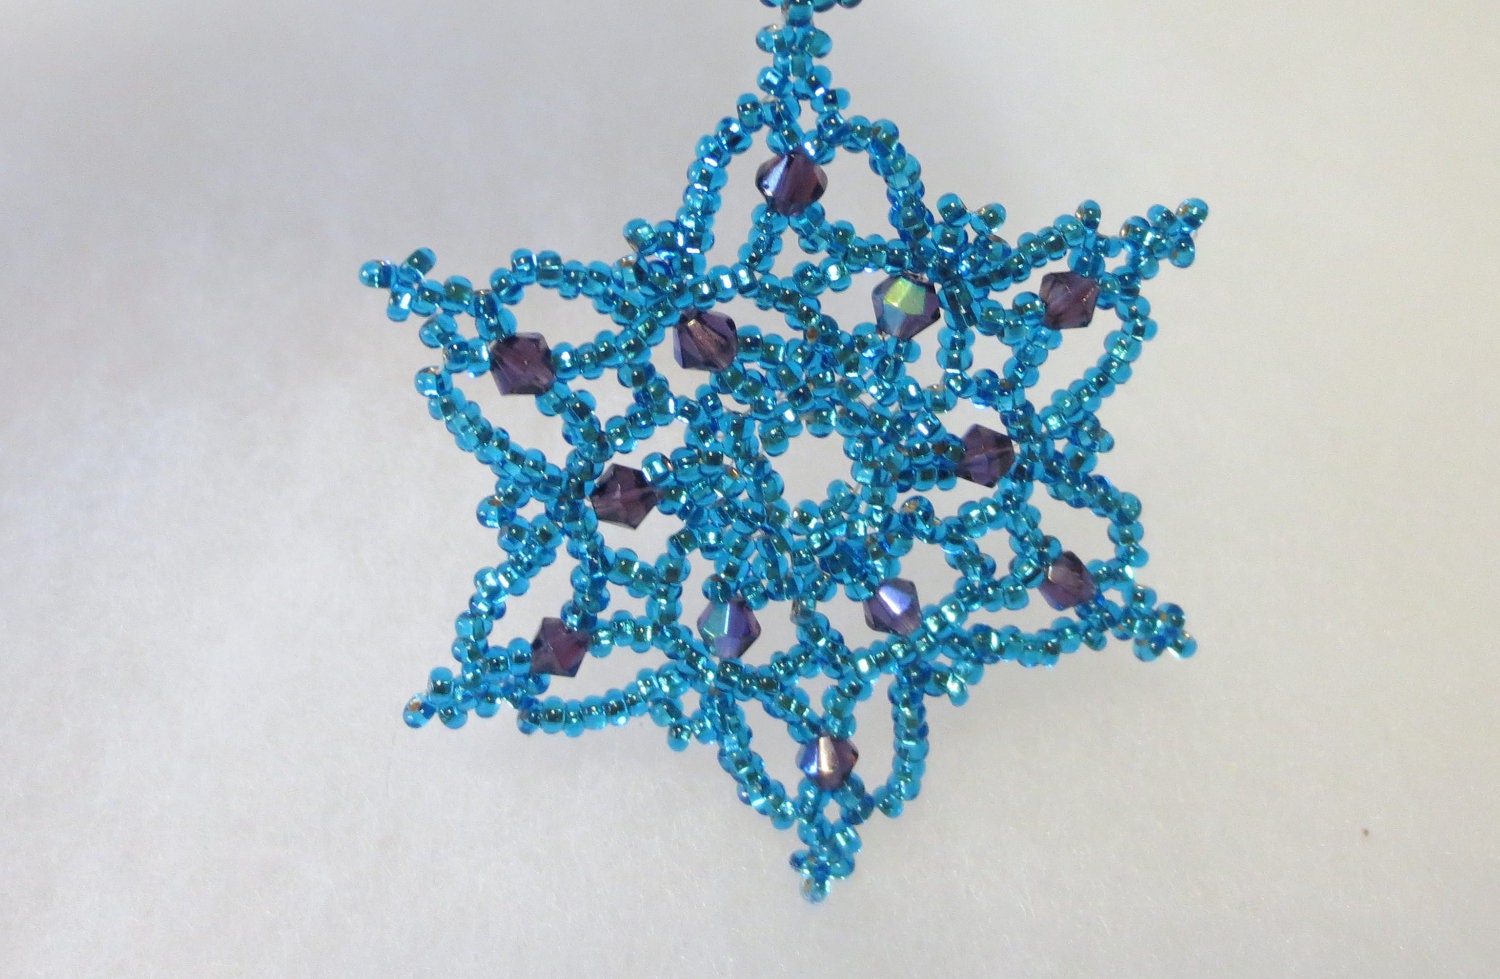 Bead and crystal snowflake / wreath ornament.